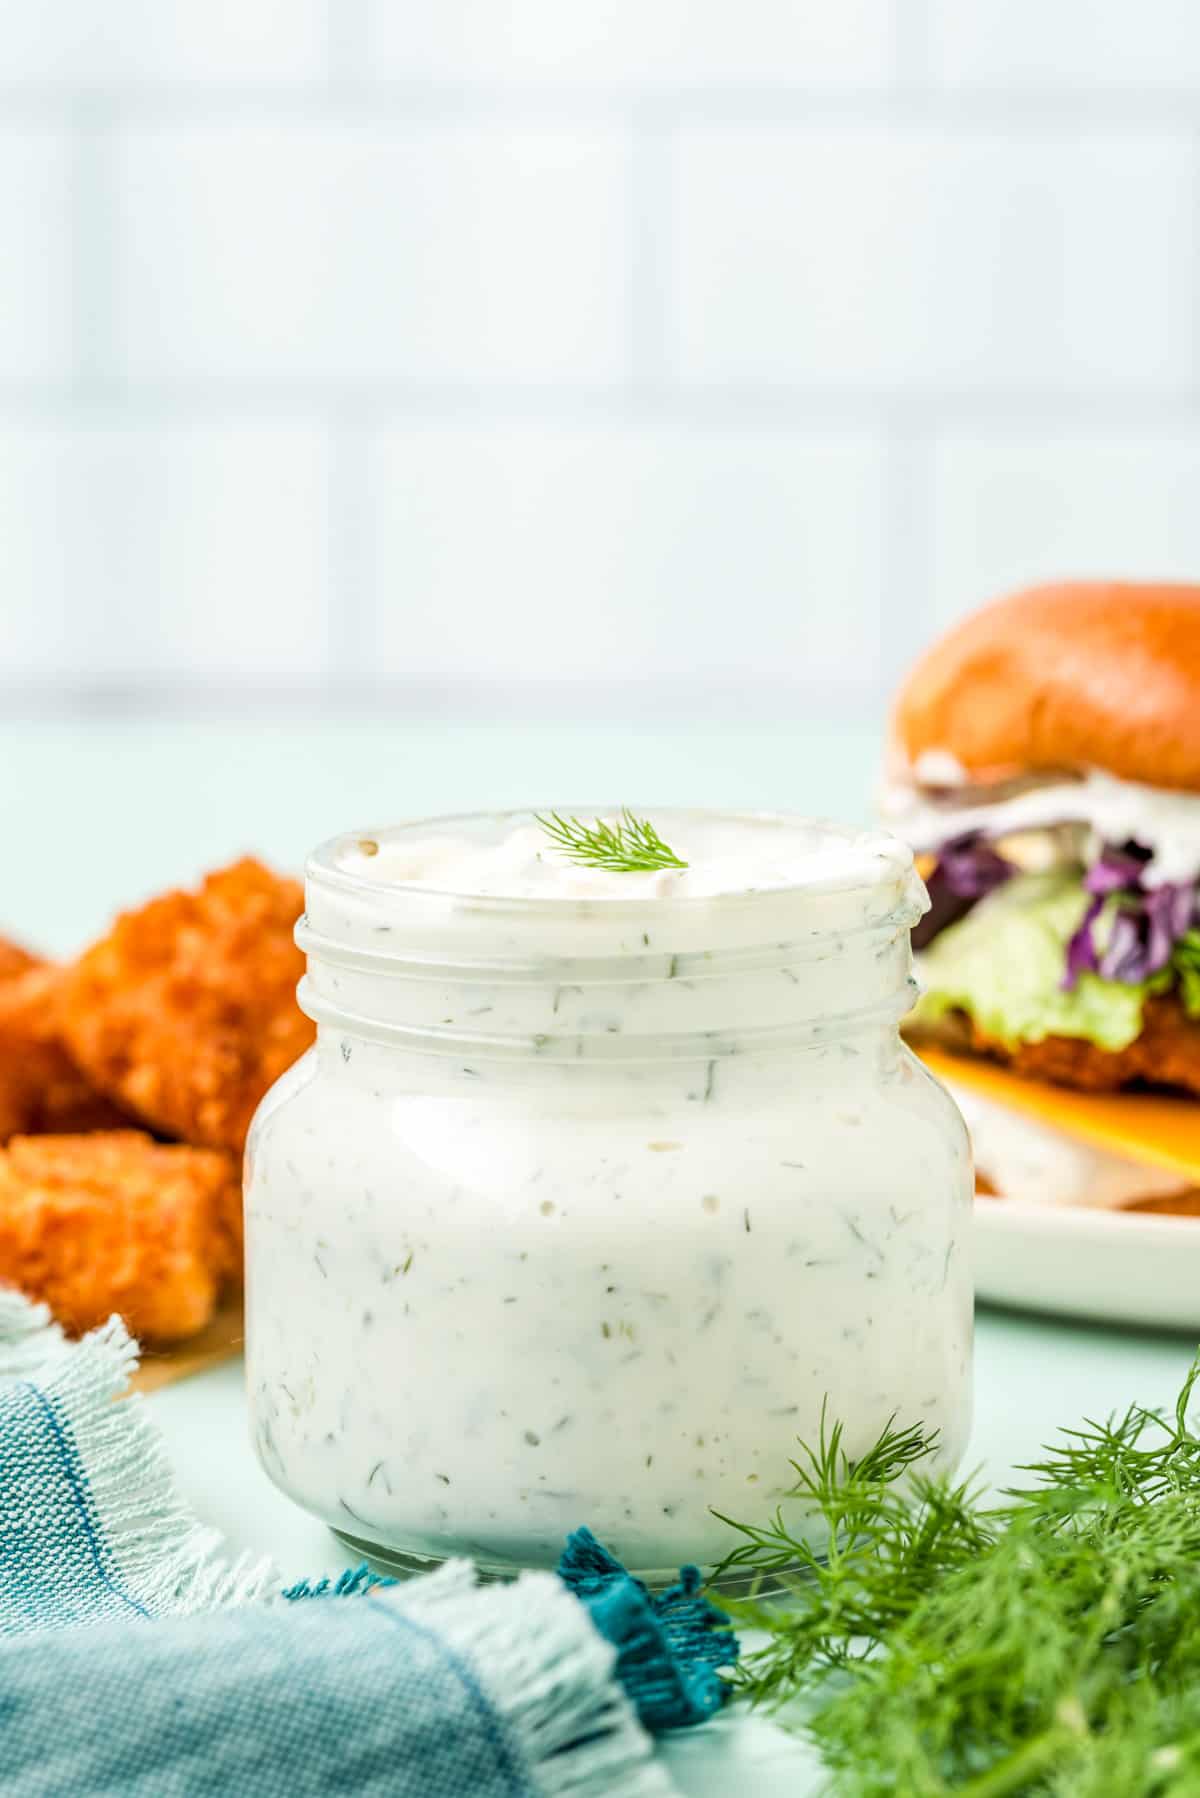 Sauce in glass jar with fish and sandwich in background and dill in front of jar.